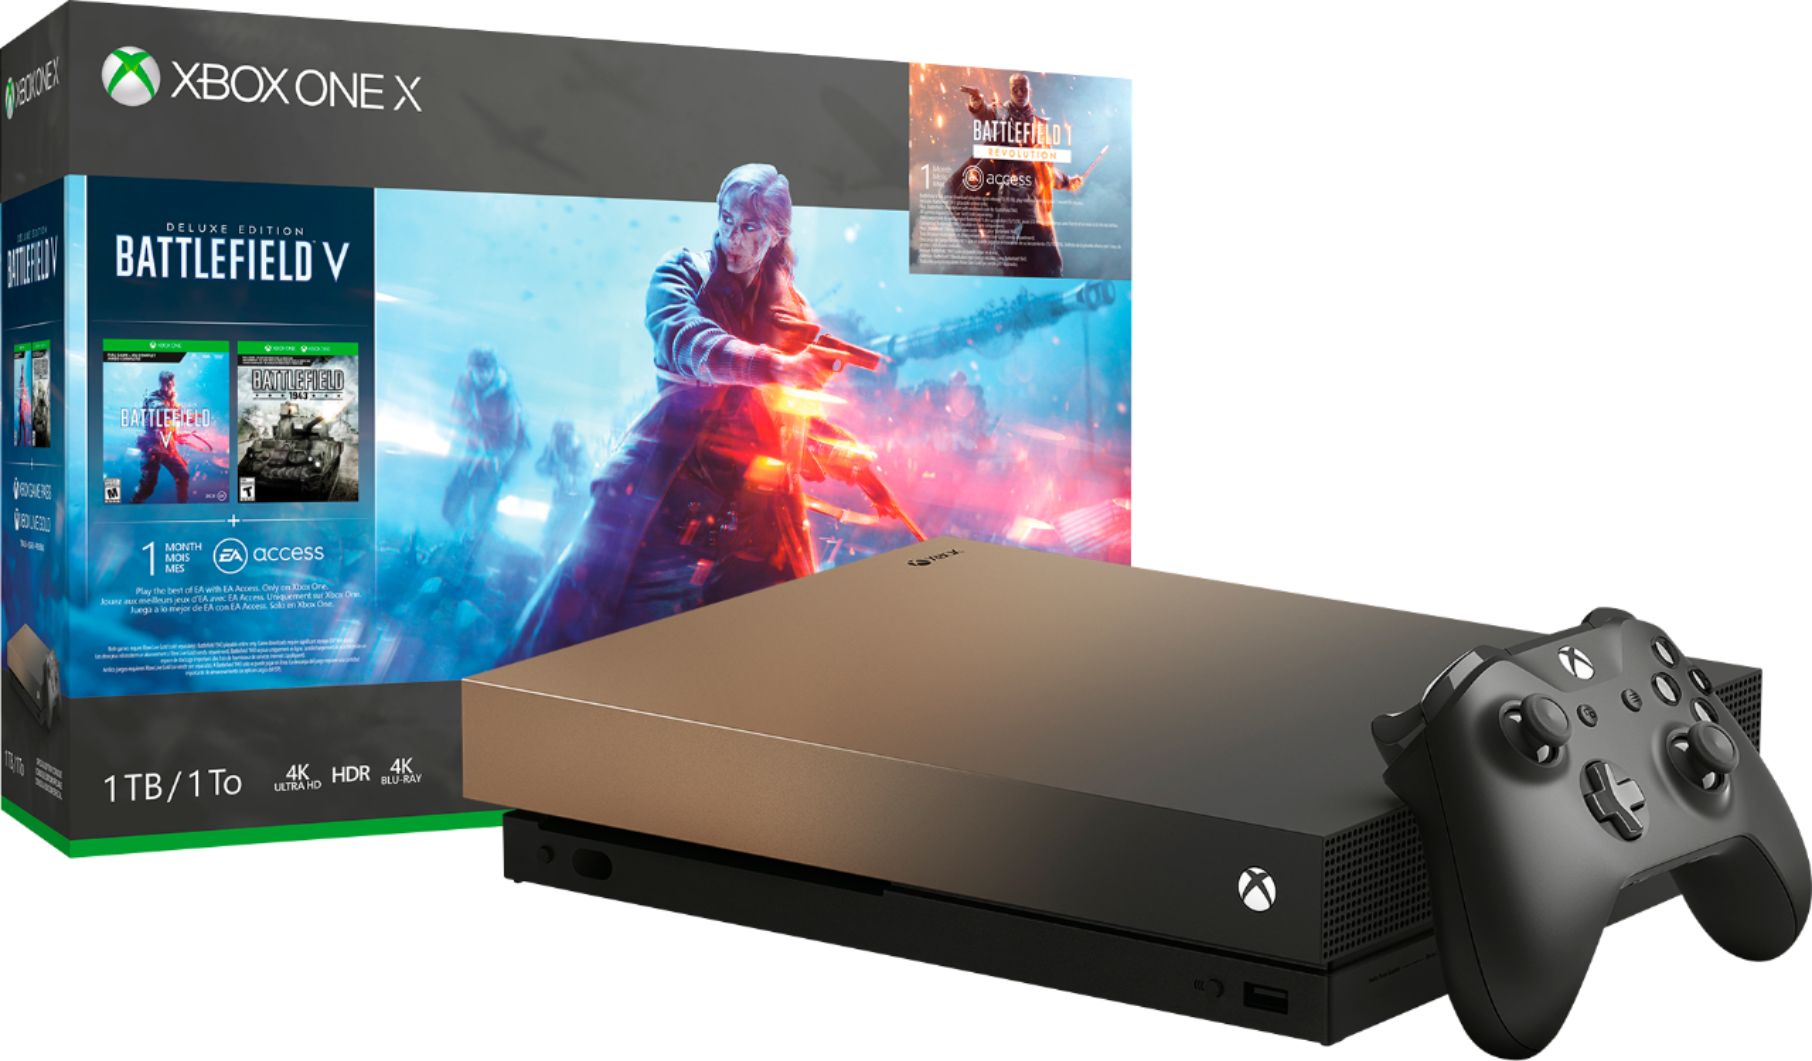 Margaret Mitchell Hinder Kiwi Microsoft Xbox One X 1TB Gold Rush Special Edition Battlefield V Bundle  with 4K Ultra HD Blu-ray Gray Gold FMP-00023 - Best Buy